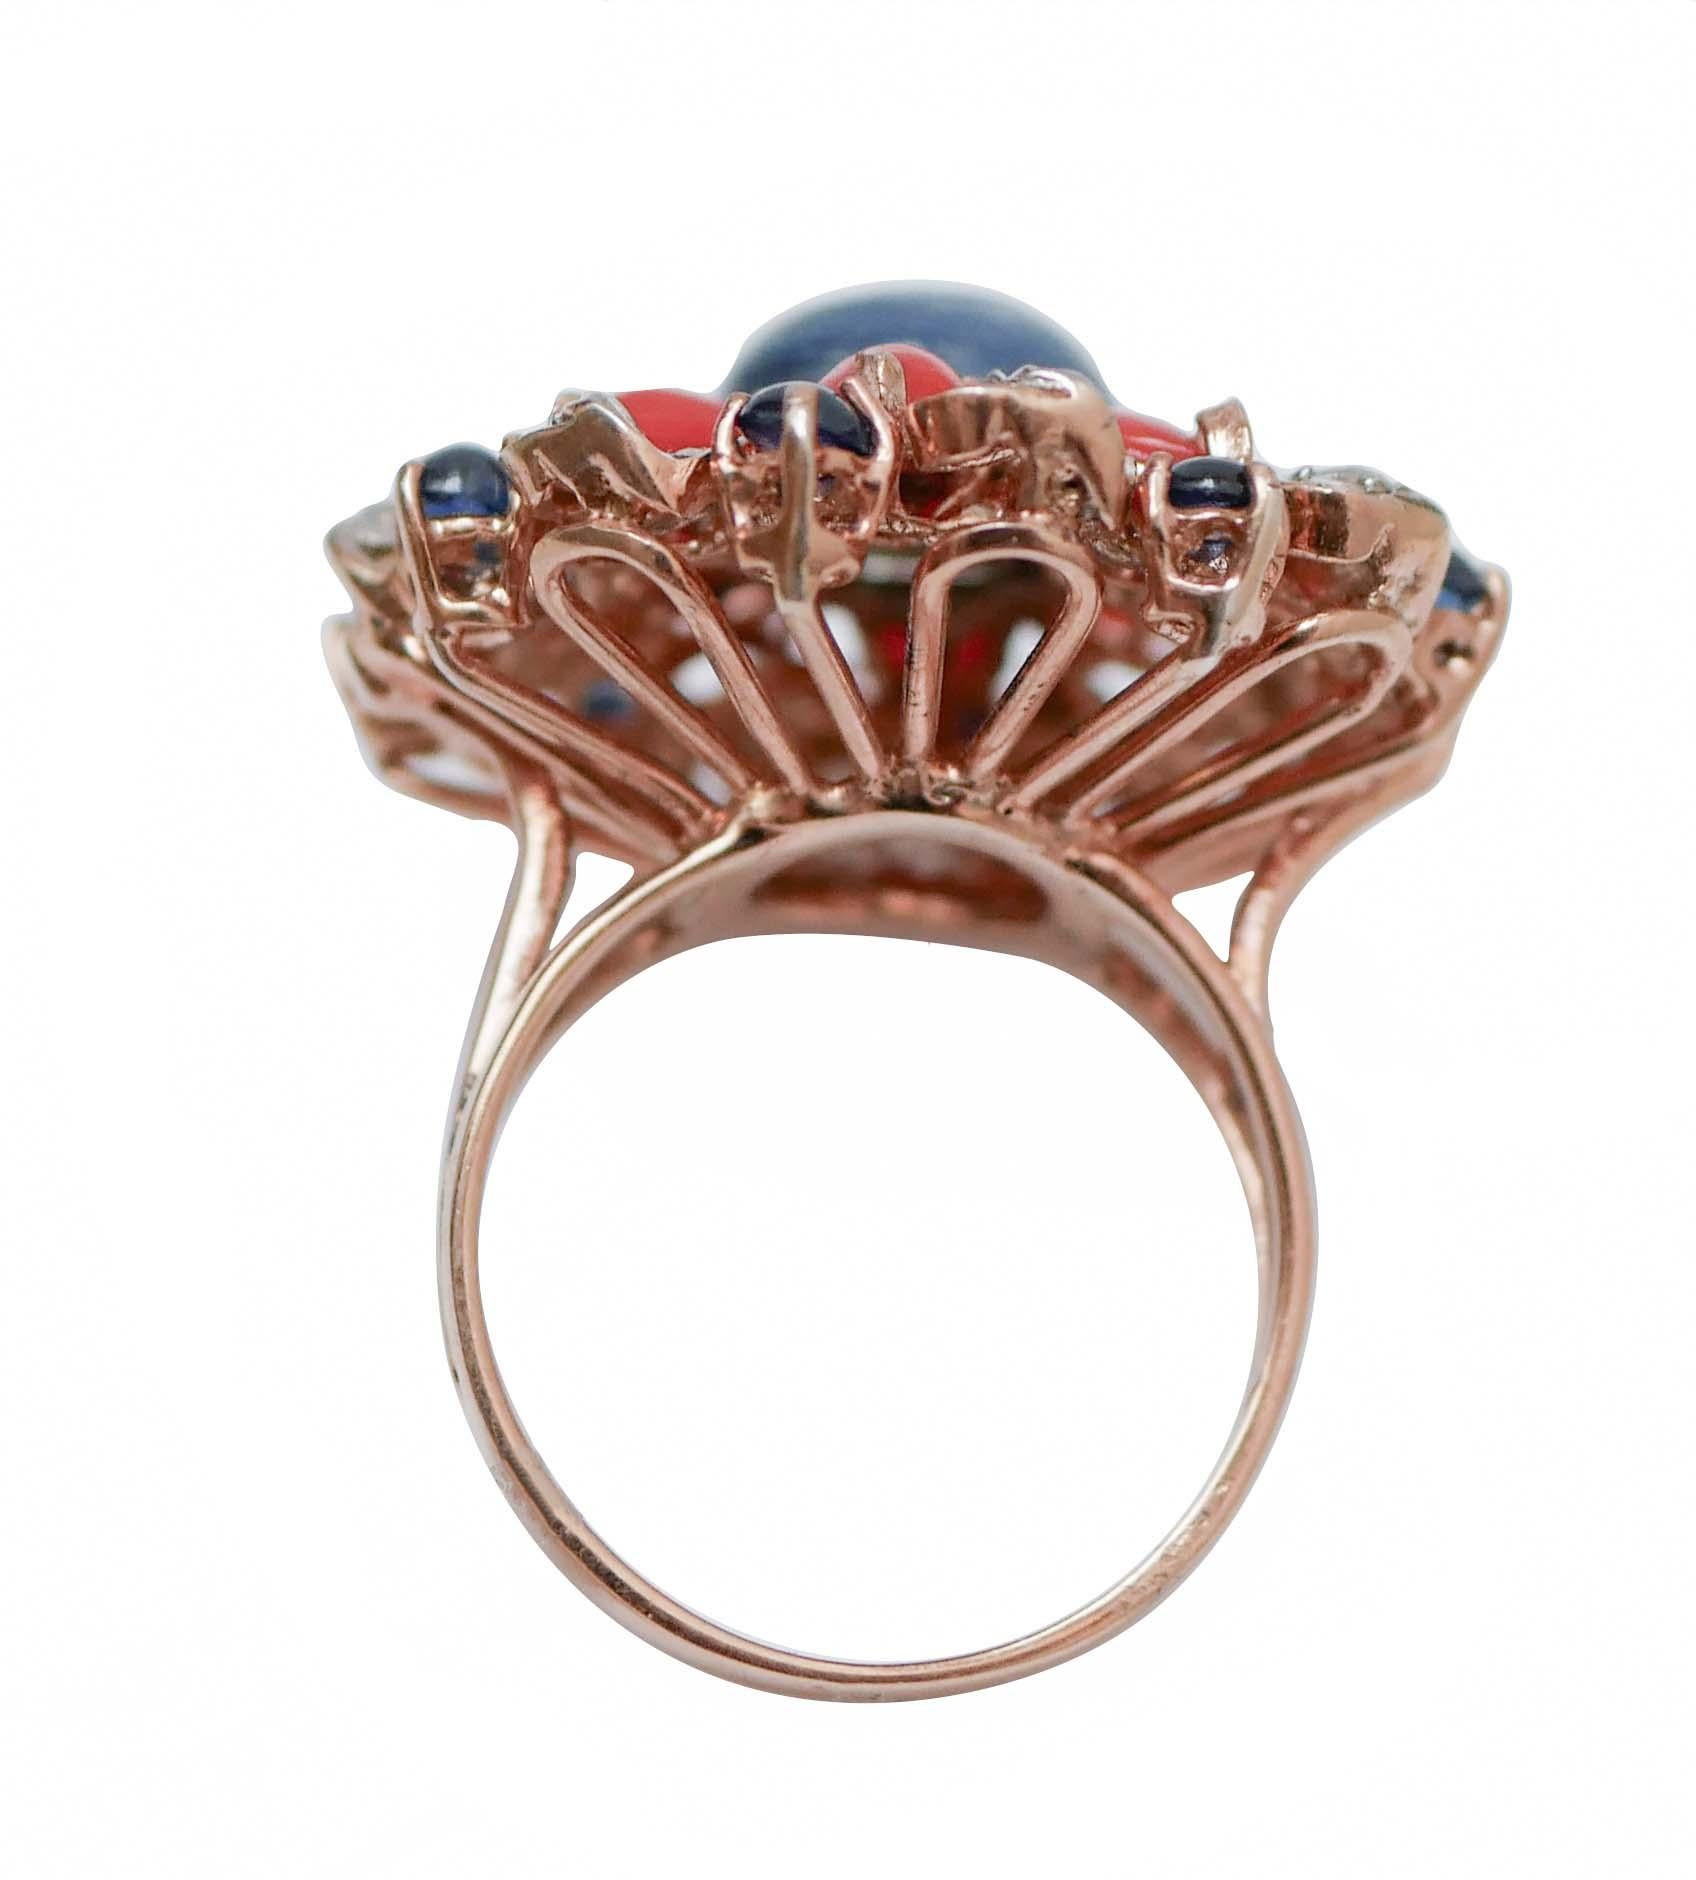 Retro Kyanite, Sapphires, Corals, Diamonds, Rose Gold and Silver Ring. For Sale